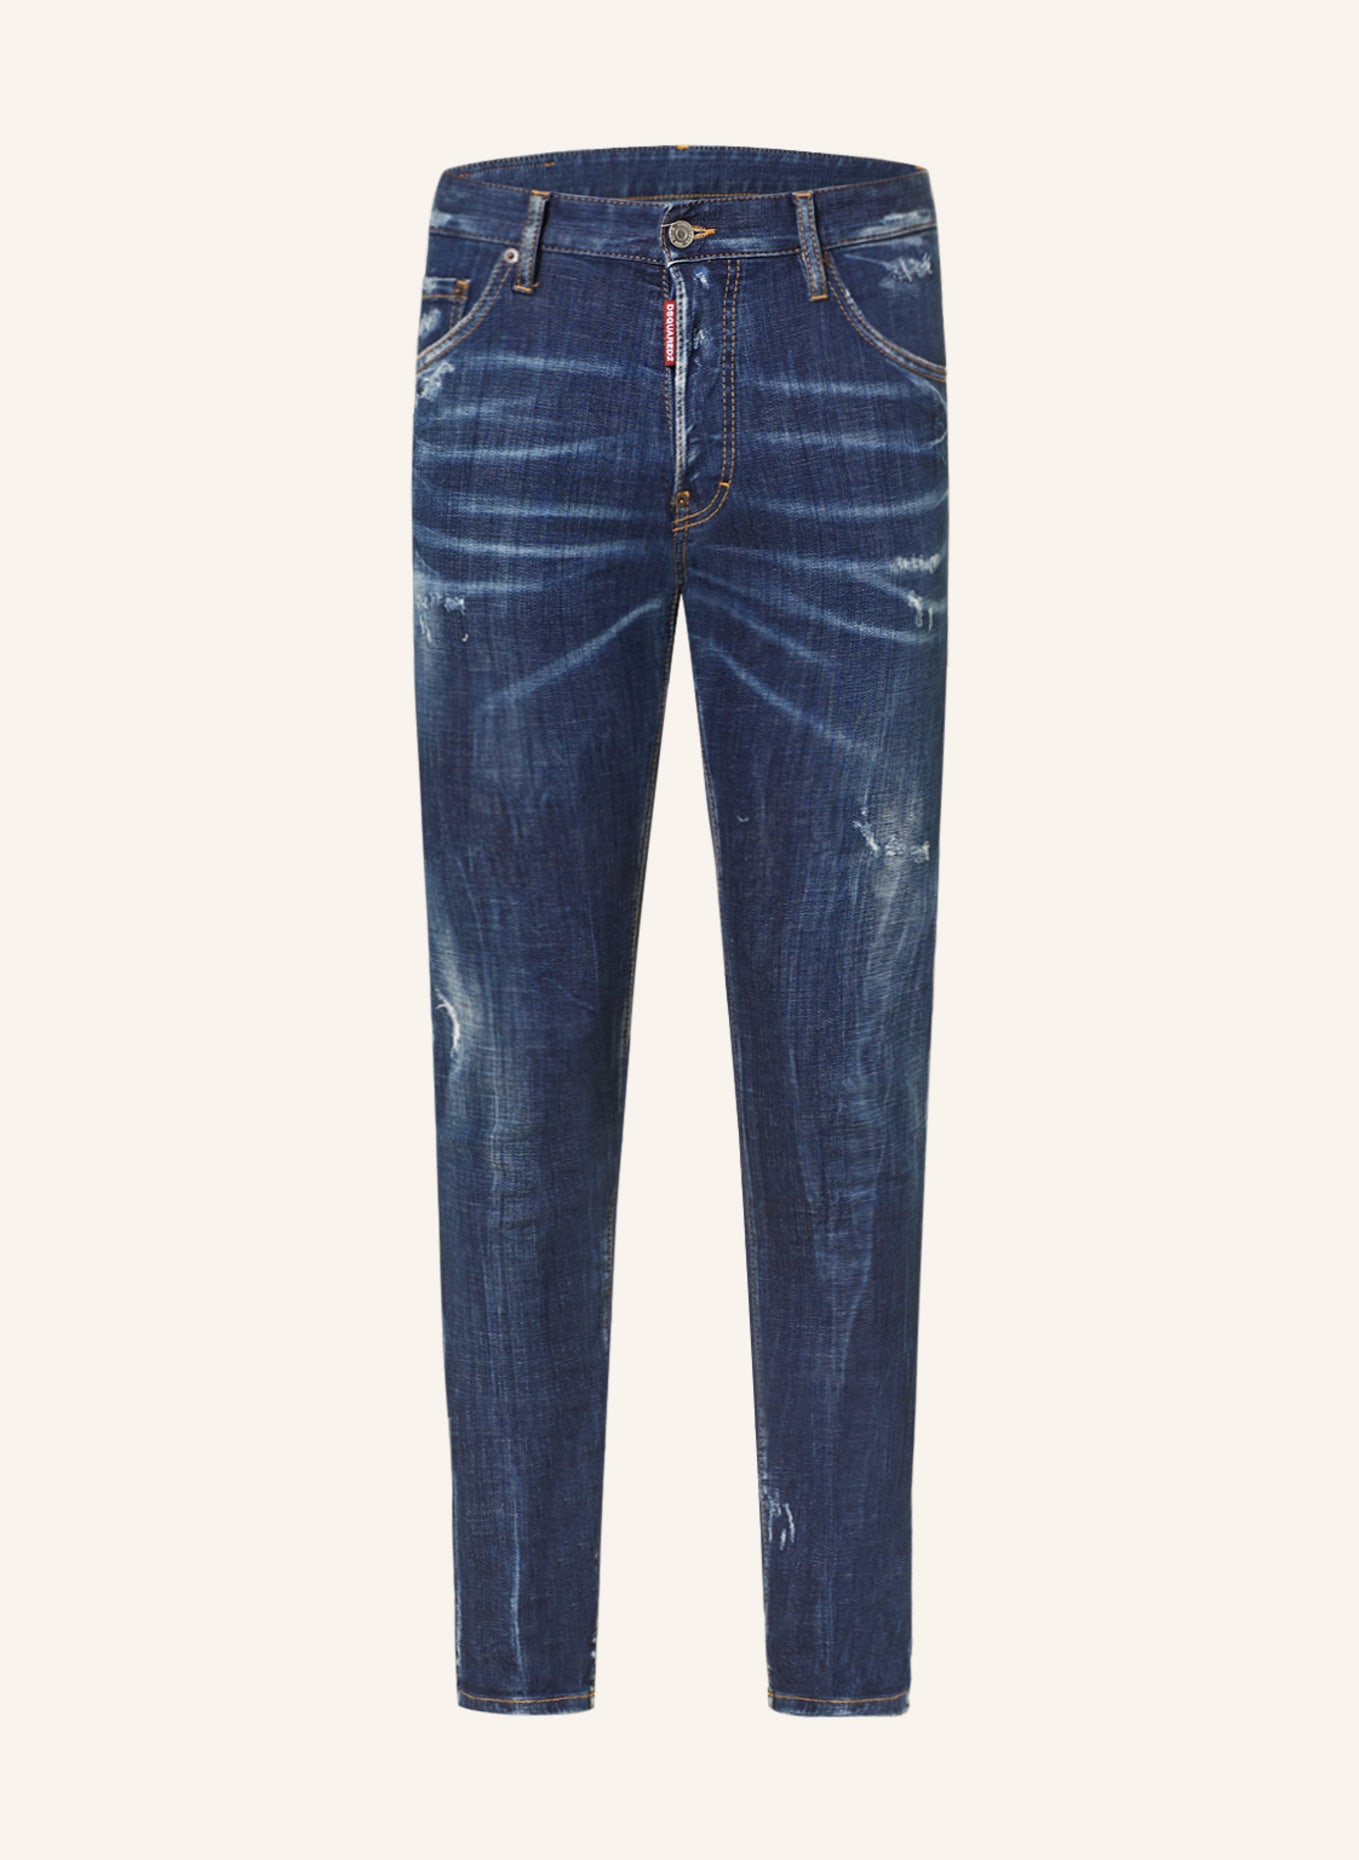 DSQUARED2 Destroyed Jeans COOL GUY Extra Slim Fit, Farbe: 470 NAVY BLUE (Bild 1)